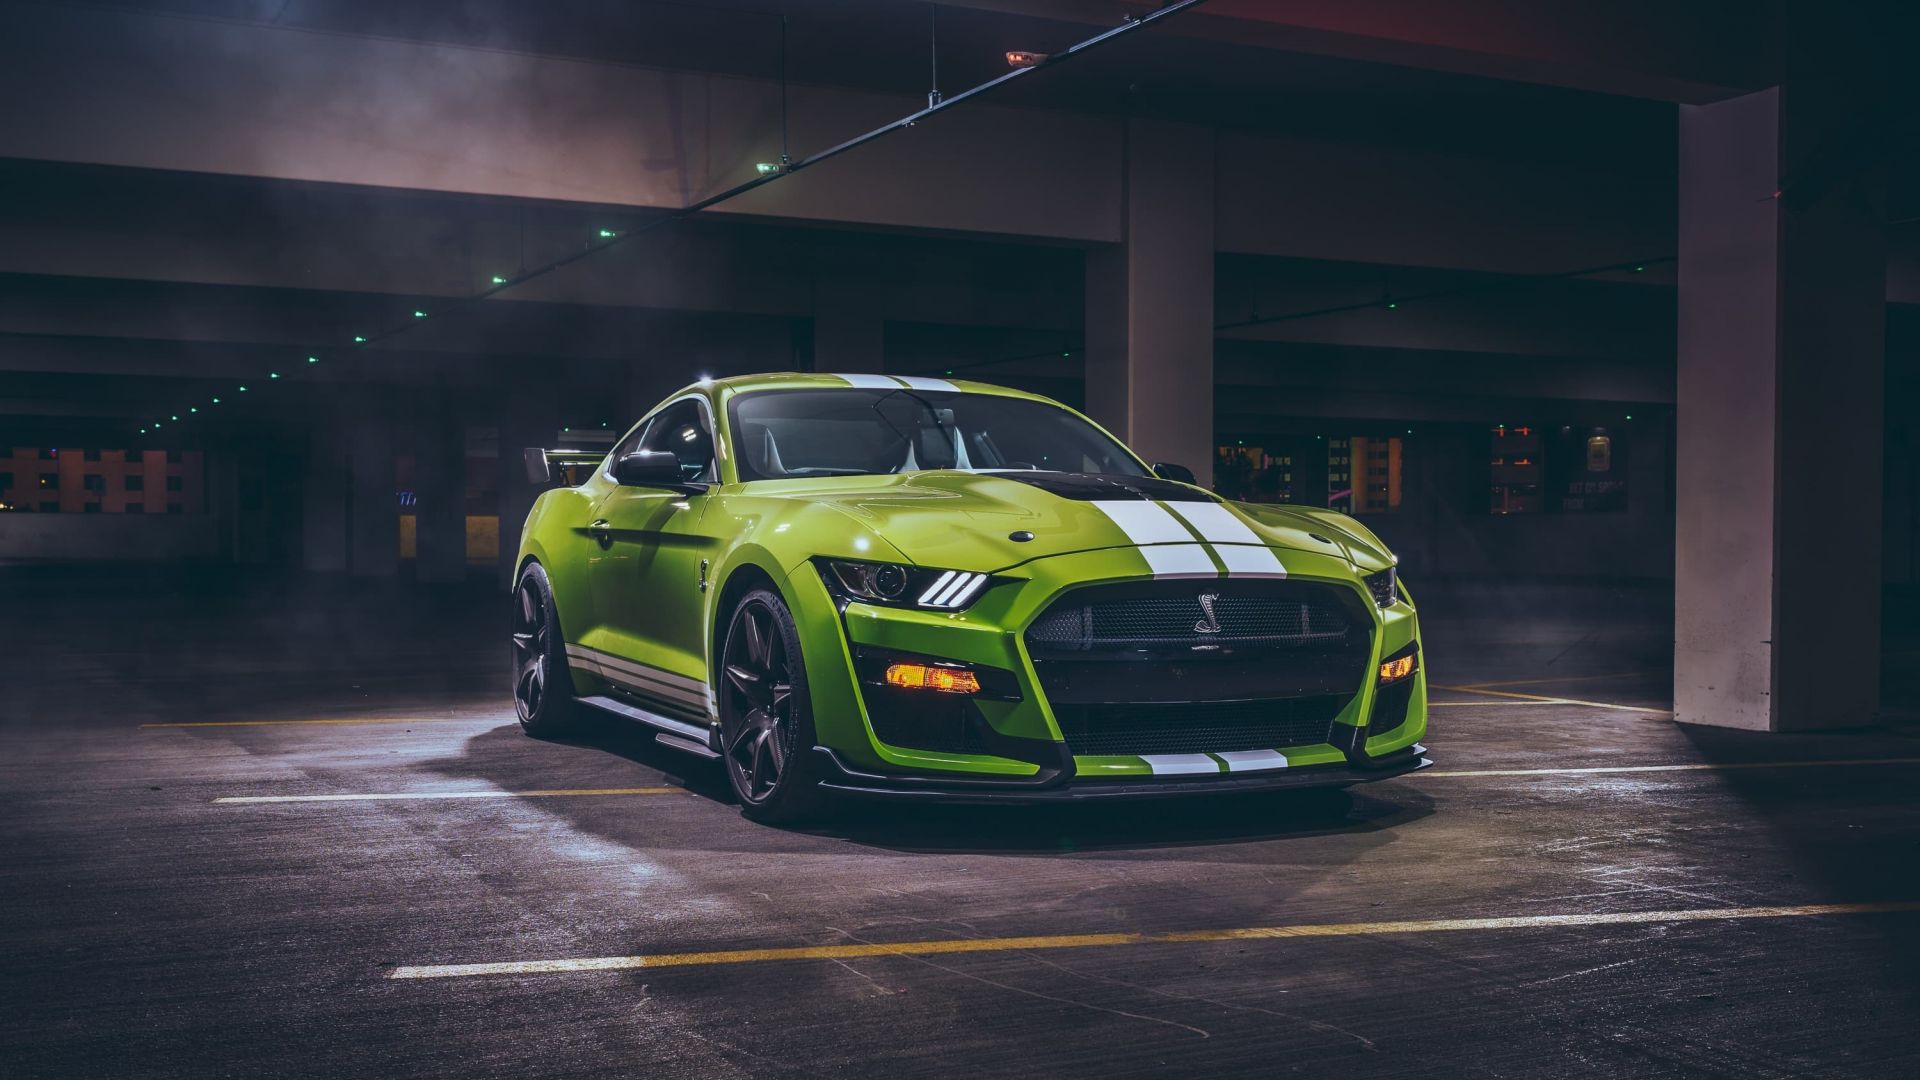 Green ford mustang shelby gt500, sportcar, 2020 wallpaper, hd image, pictur...